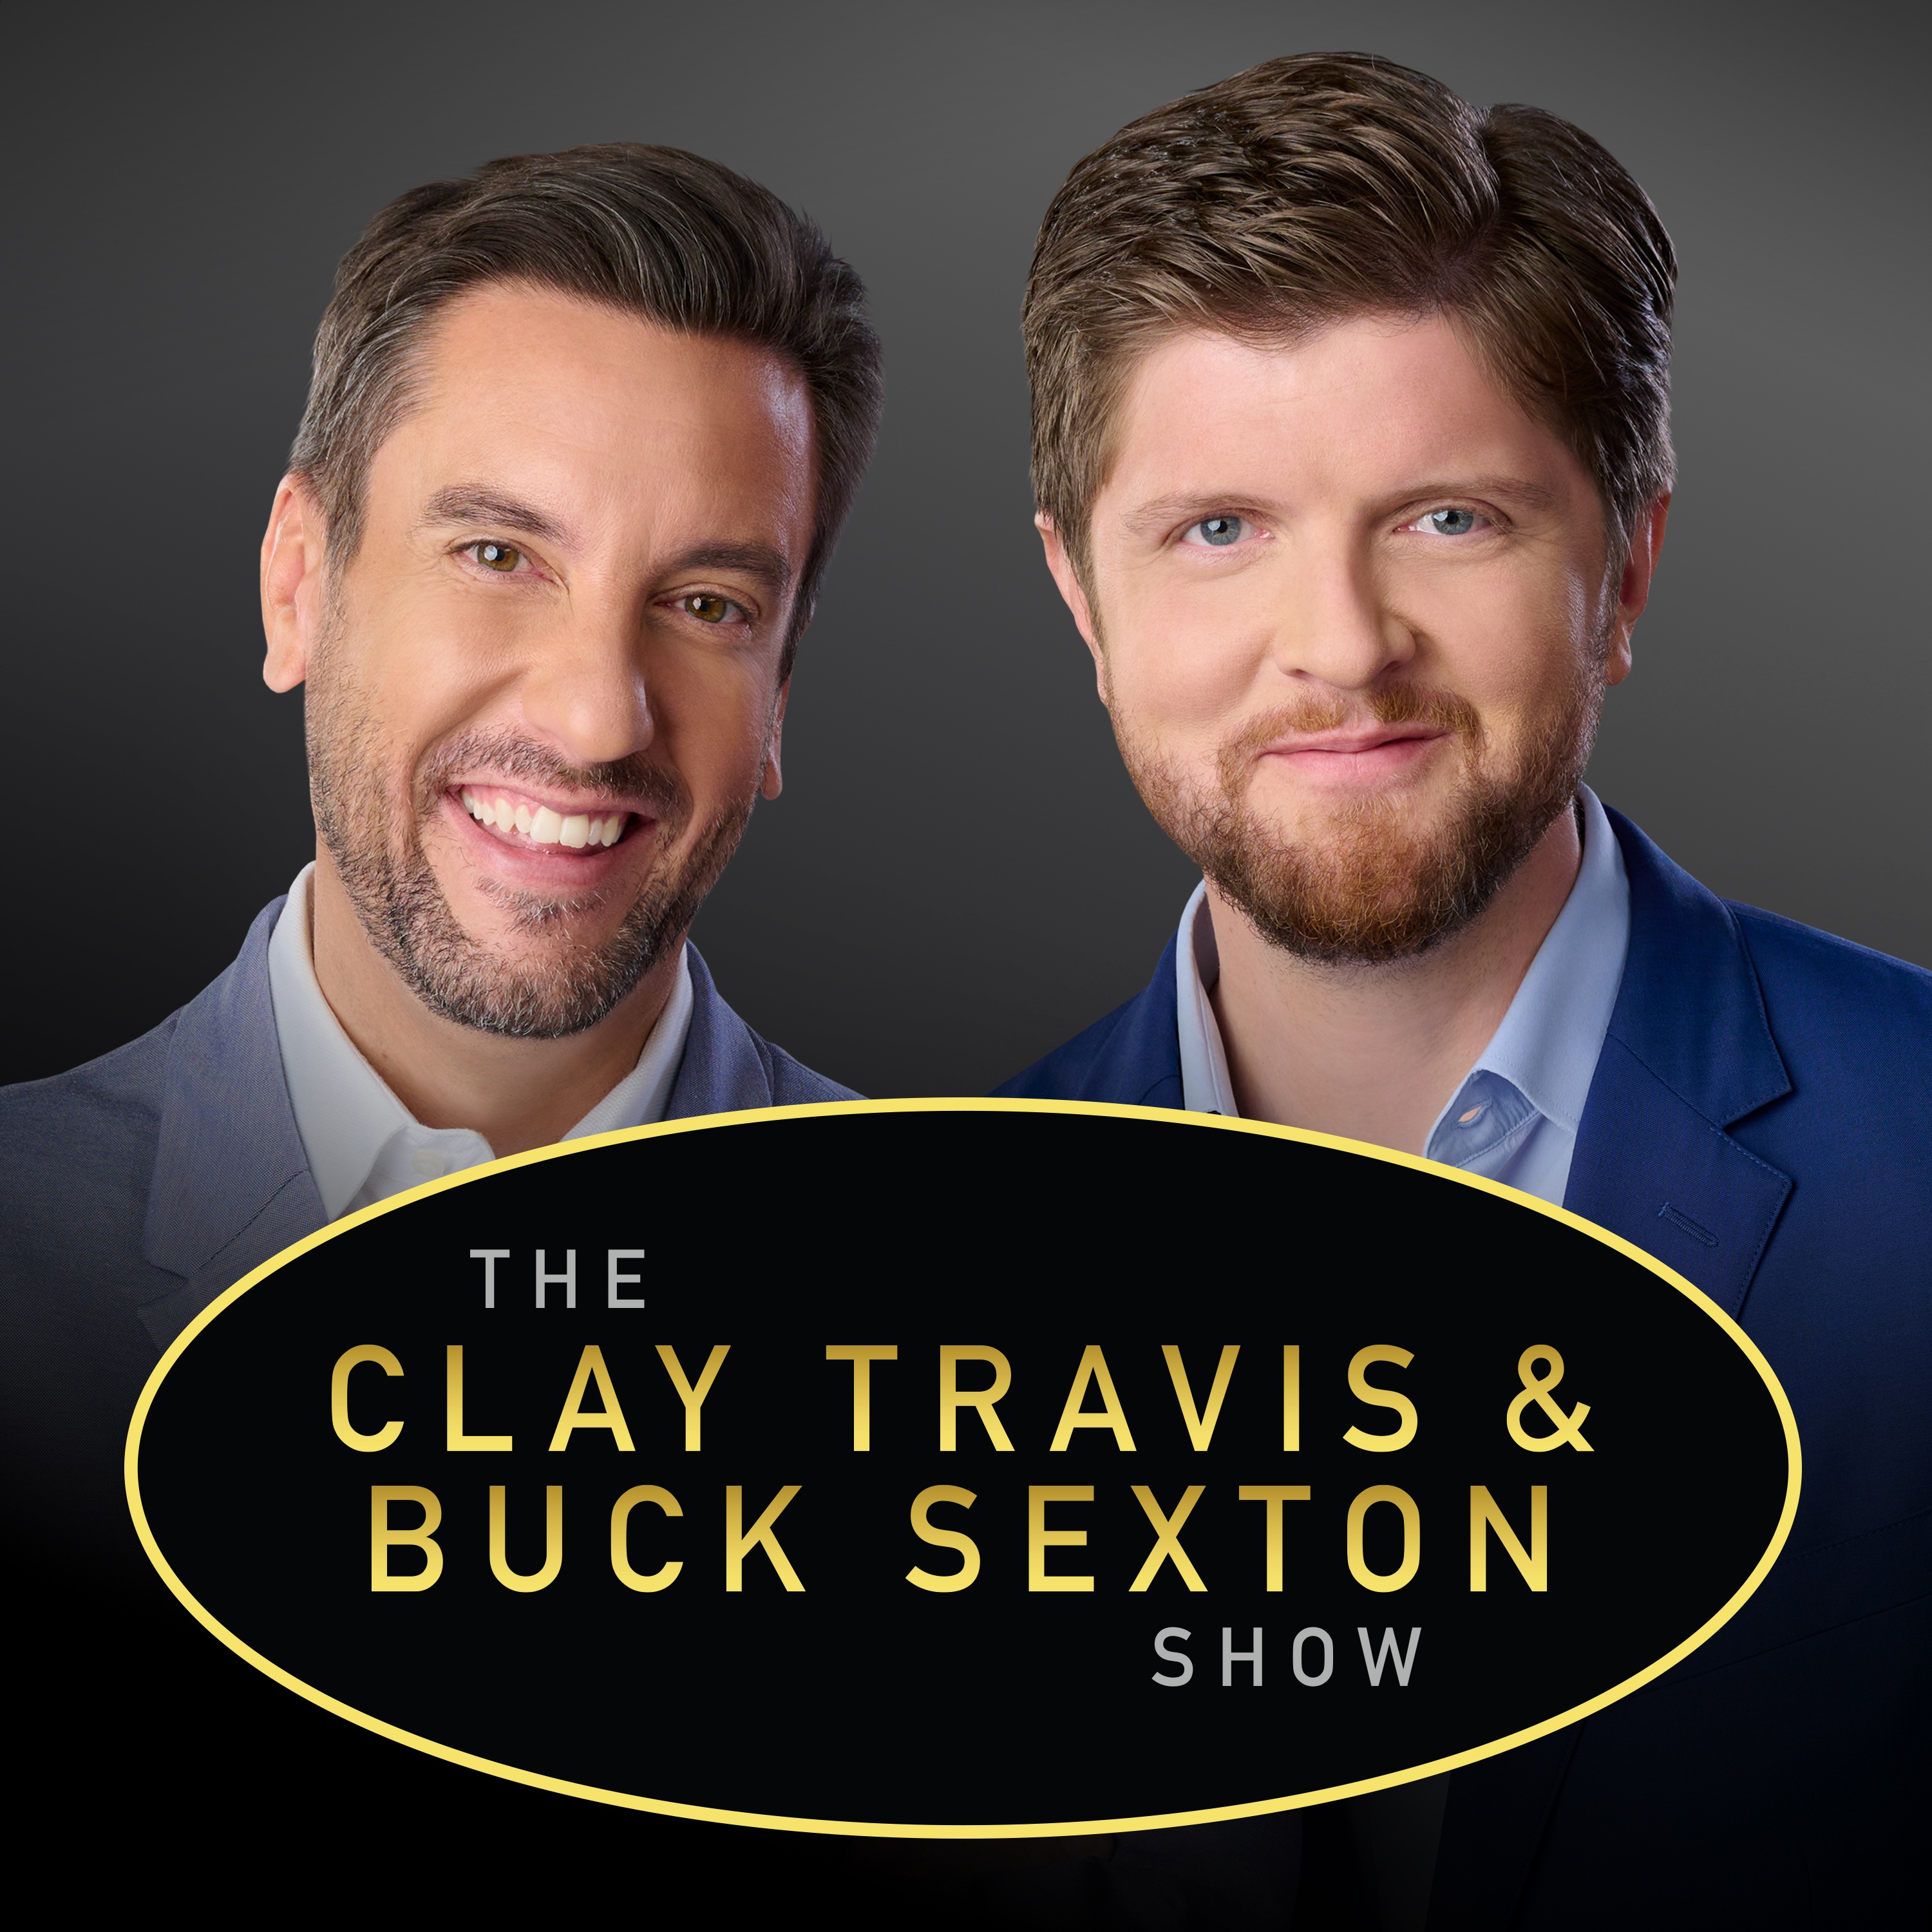 Clay Travis and Buck Sexton Show H3 – Apr 14 2022